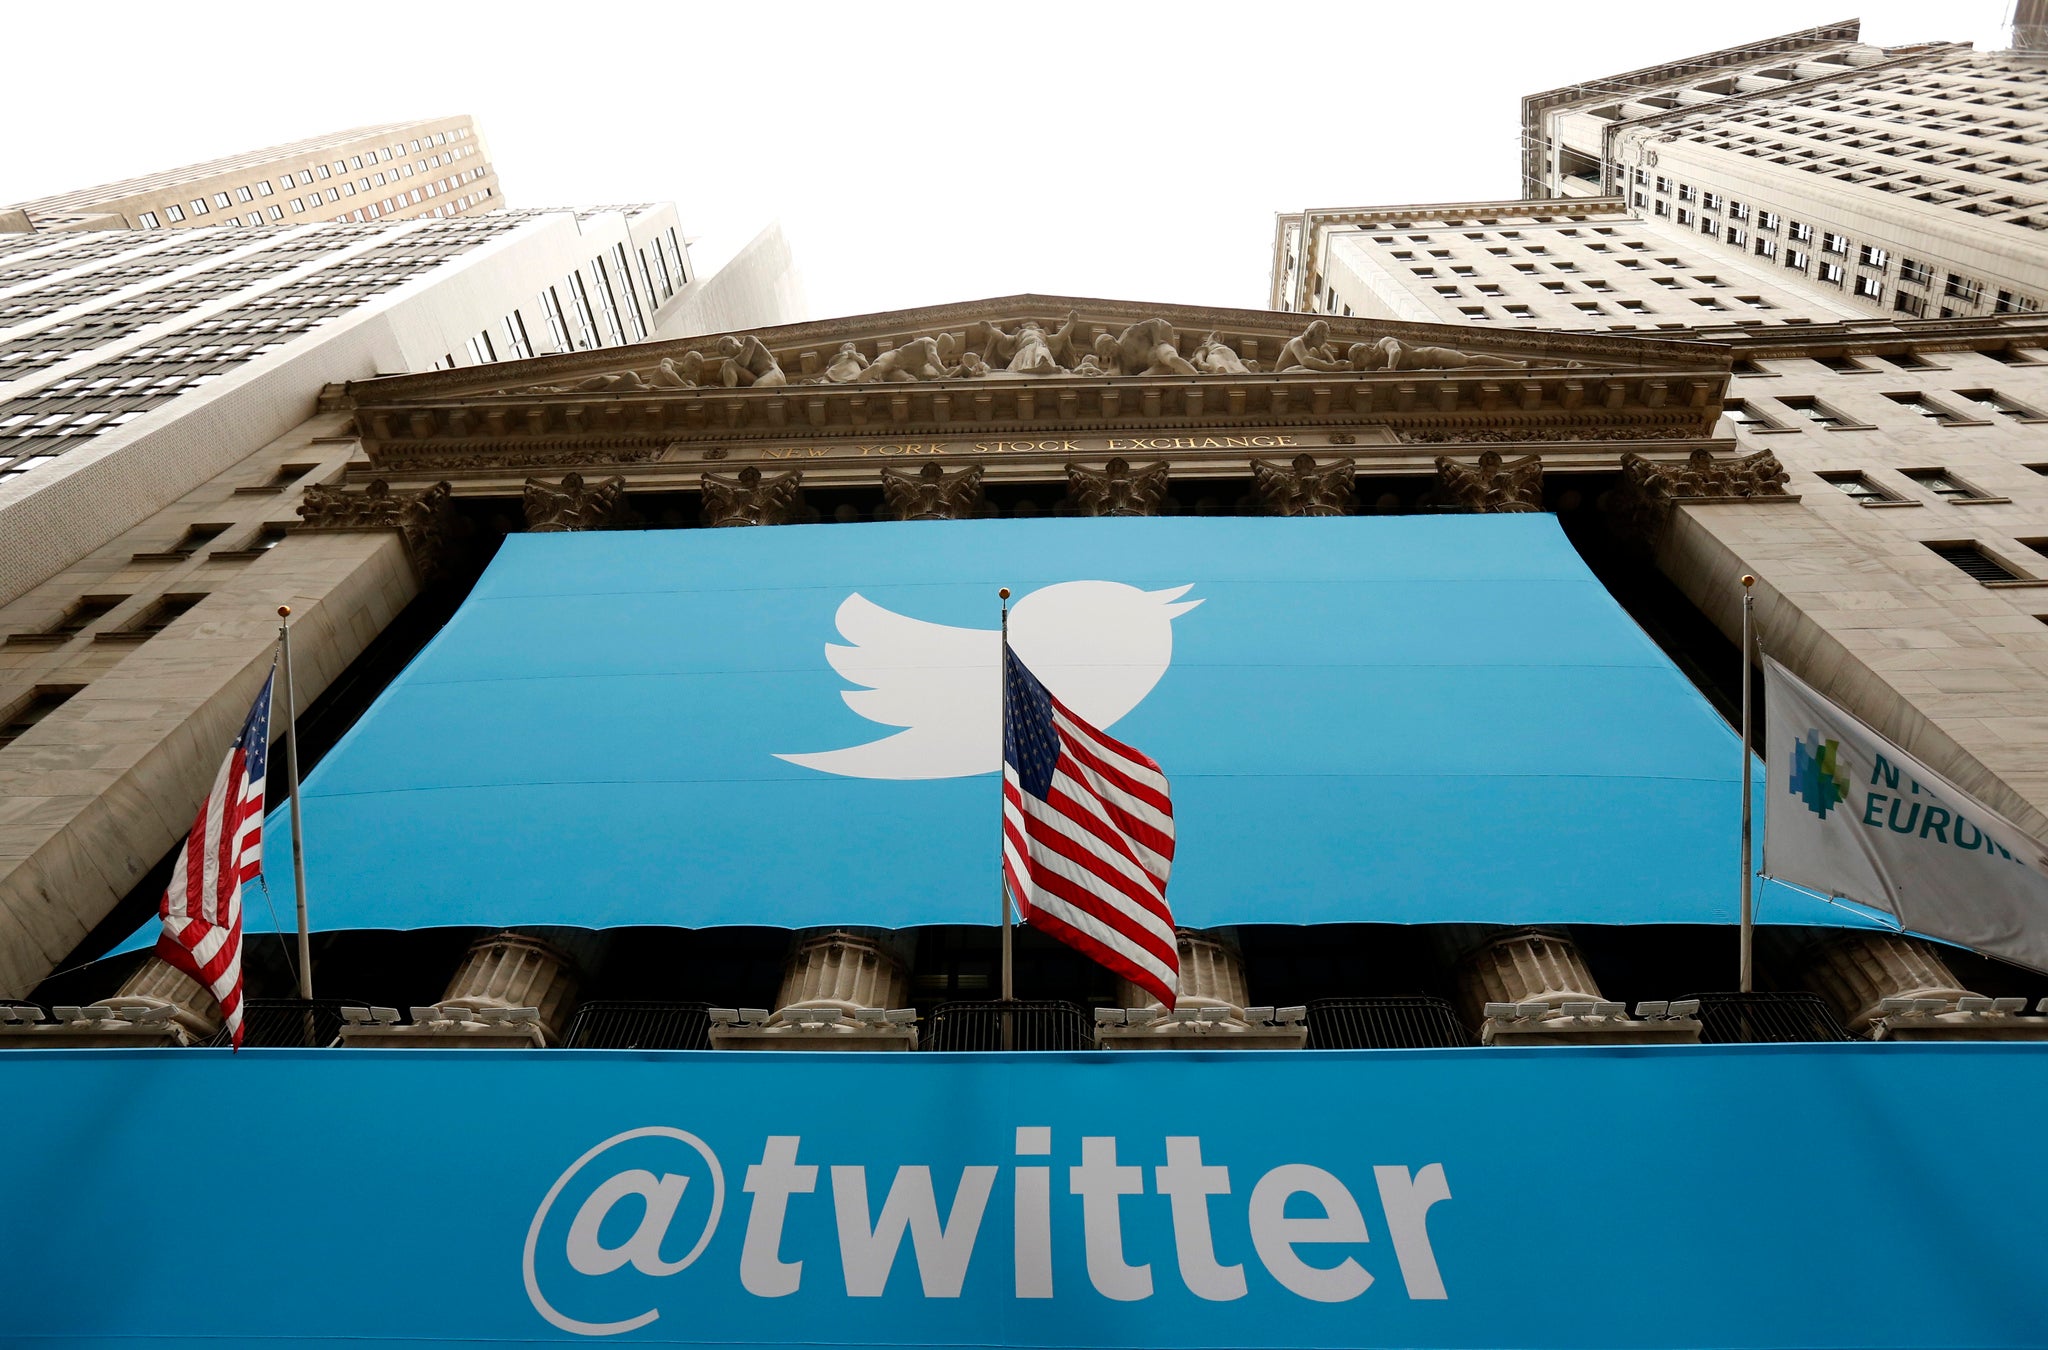 Twitter's IPO last week saw the company's share prices jump by 73 per cent in the first day of trading.